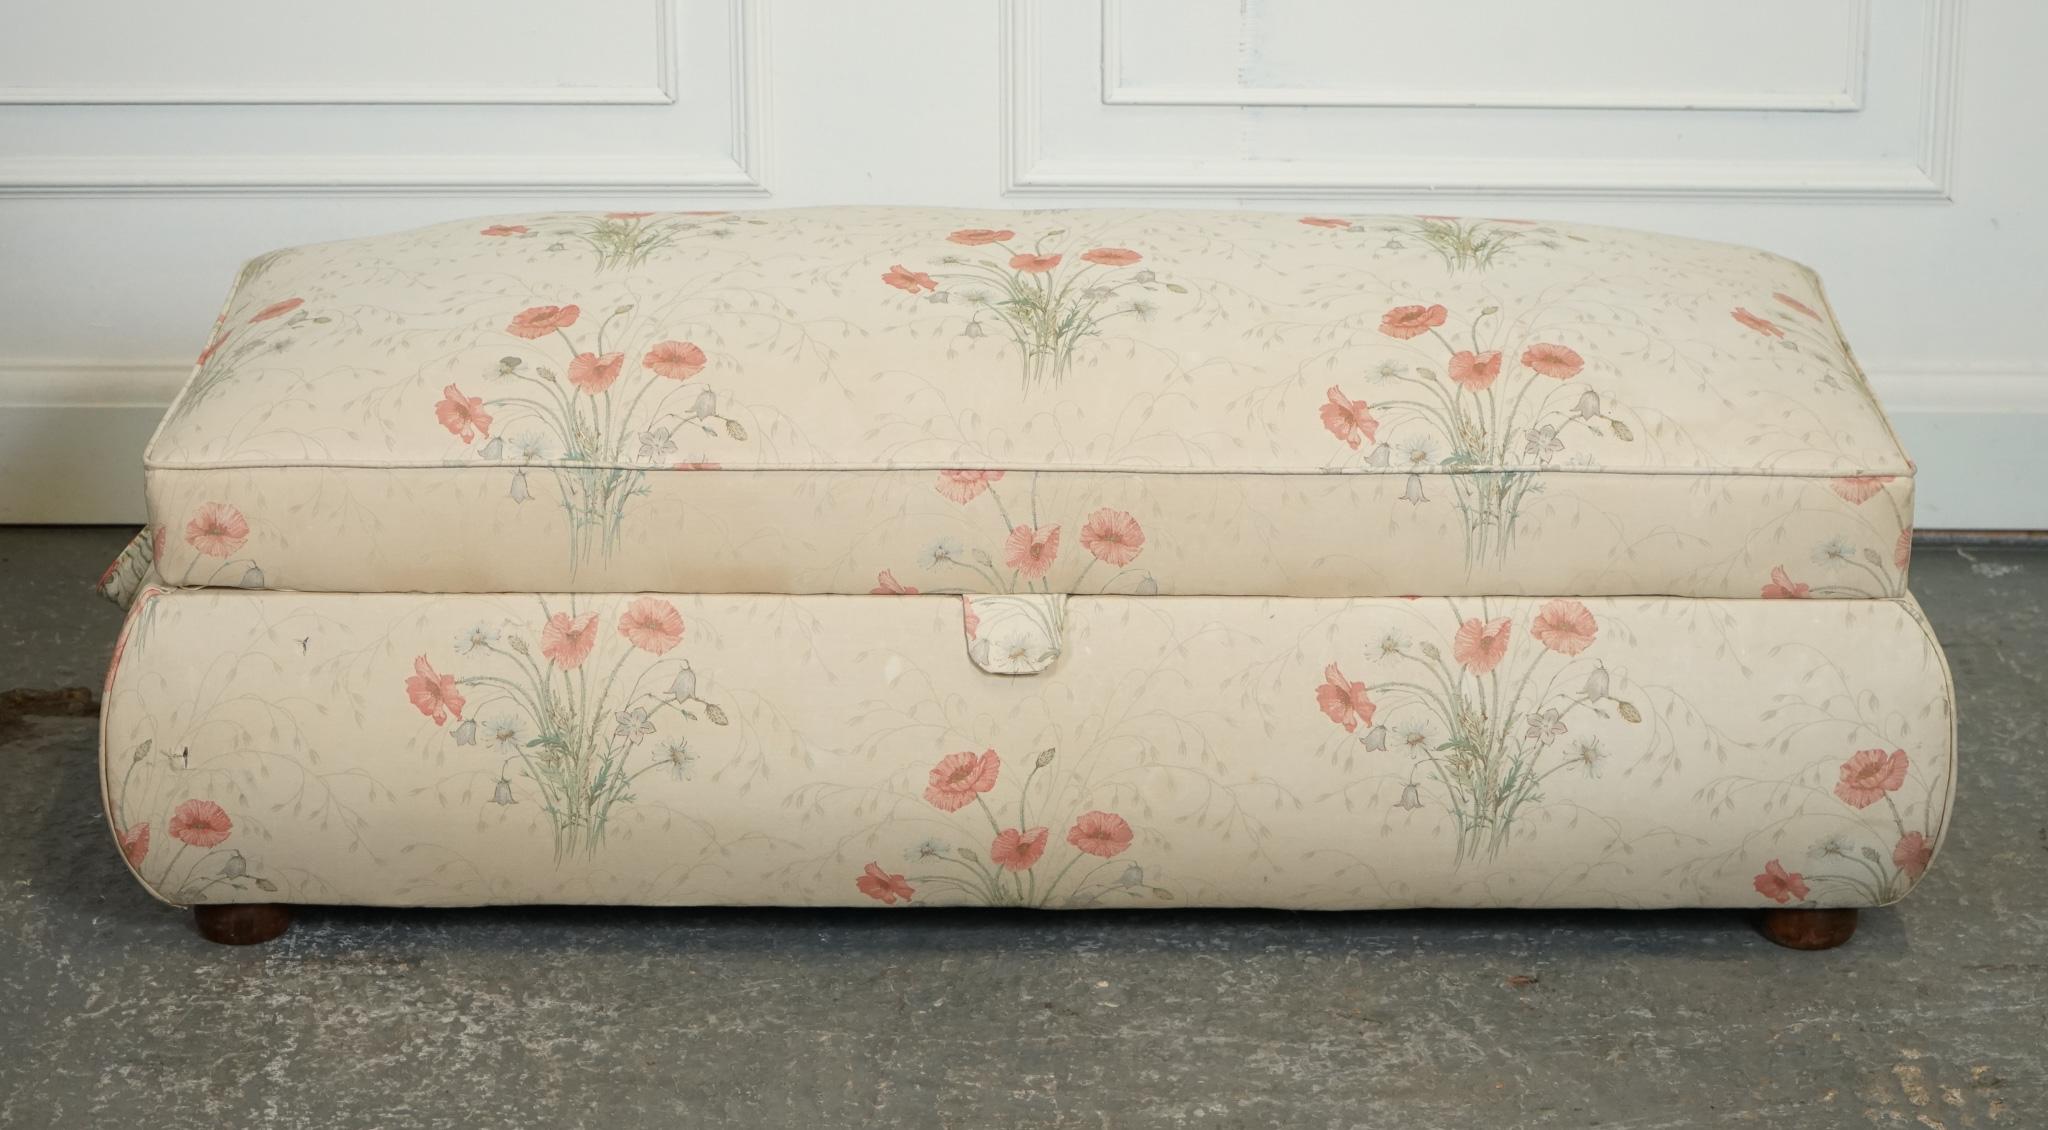 Victorian LARGE ANTIQUE VICTORIAN POPPY FLOWER PATTERN FABRiC OTTOMAN CHEST TRUNK  J1 For Sale